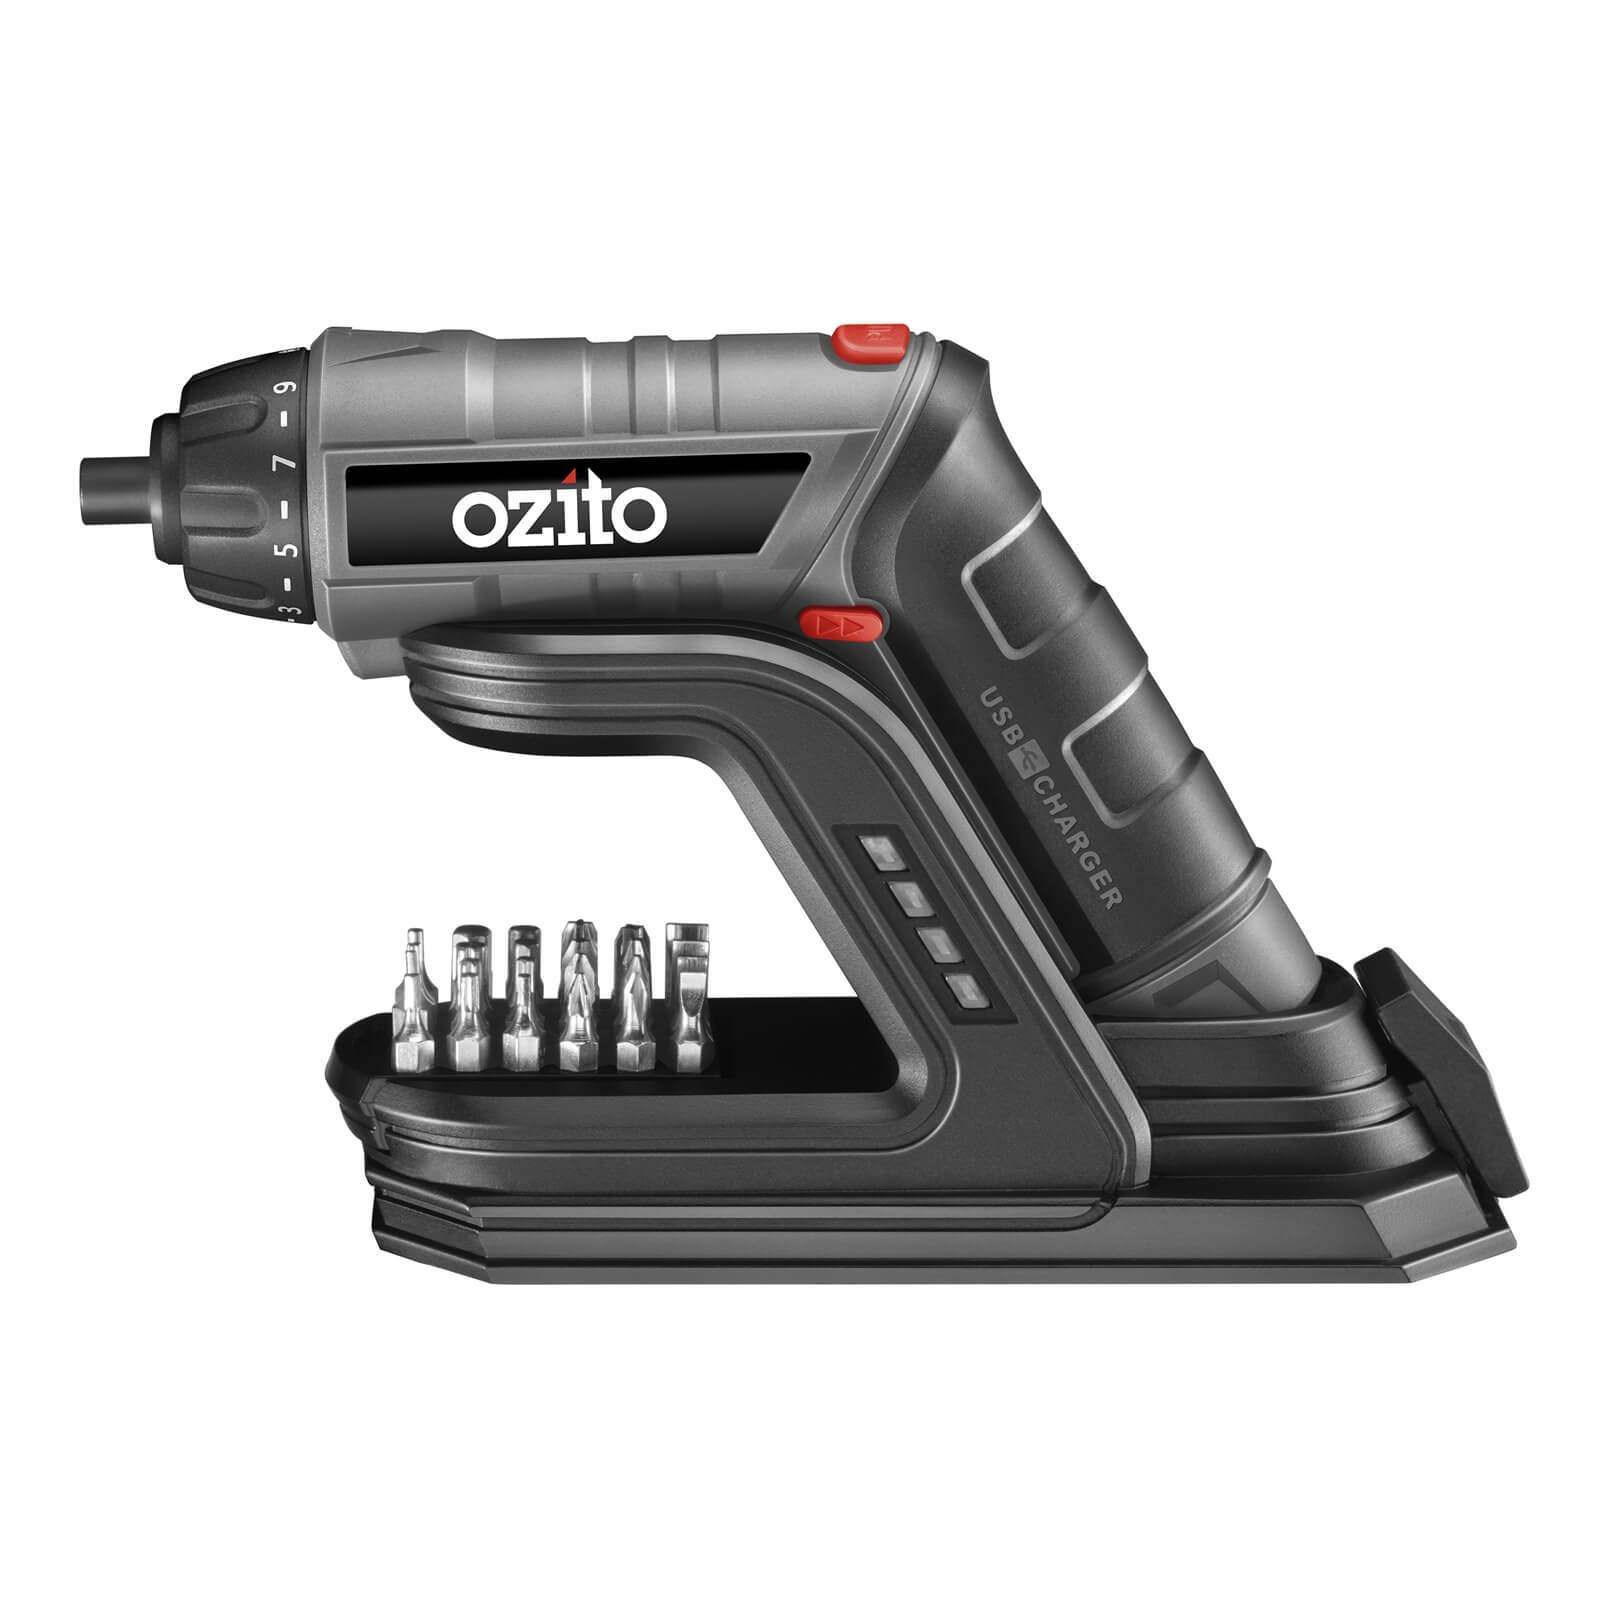 Ozito 3.6V Screwdriver Torch with Charging Base plus 24 Driver Bits